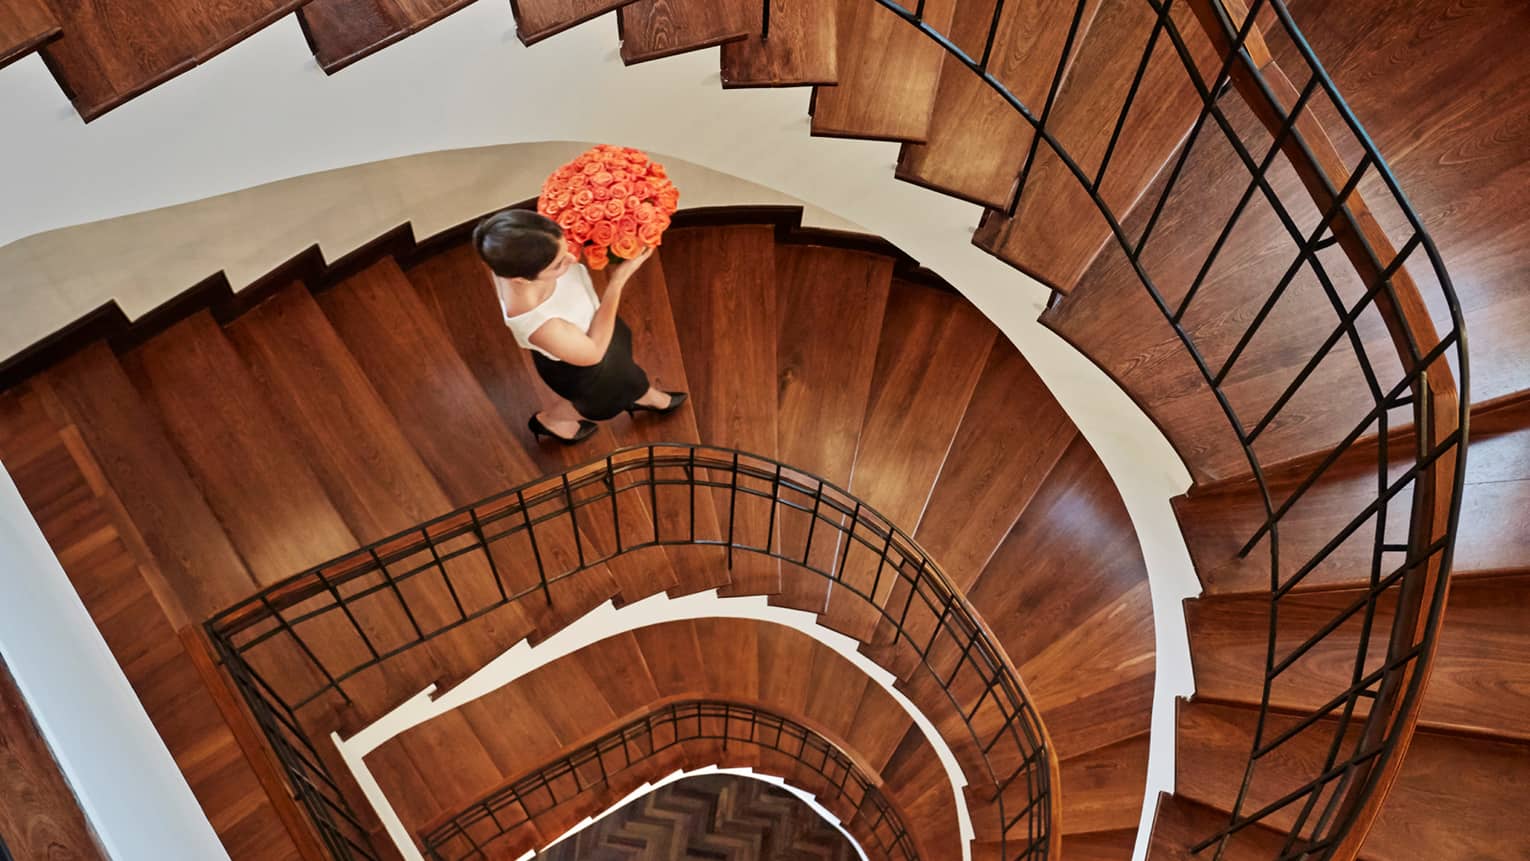 Aerial view of woman holding pink rose flower arrangement walking down wood spiral staircase